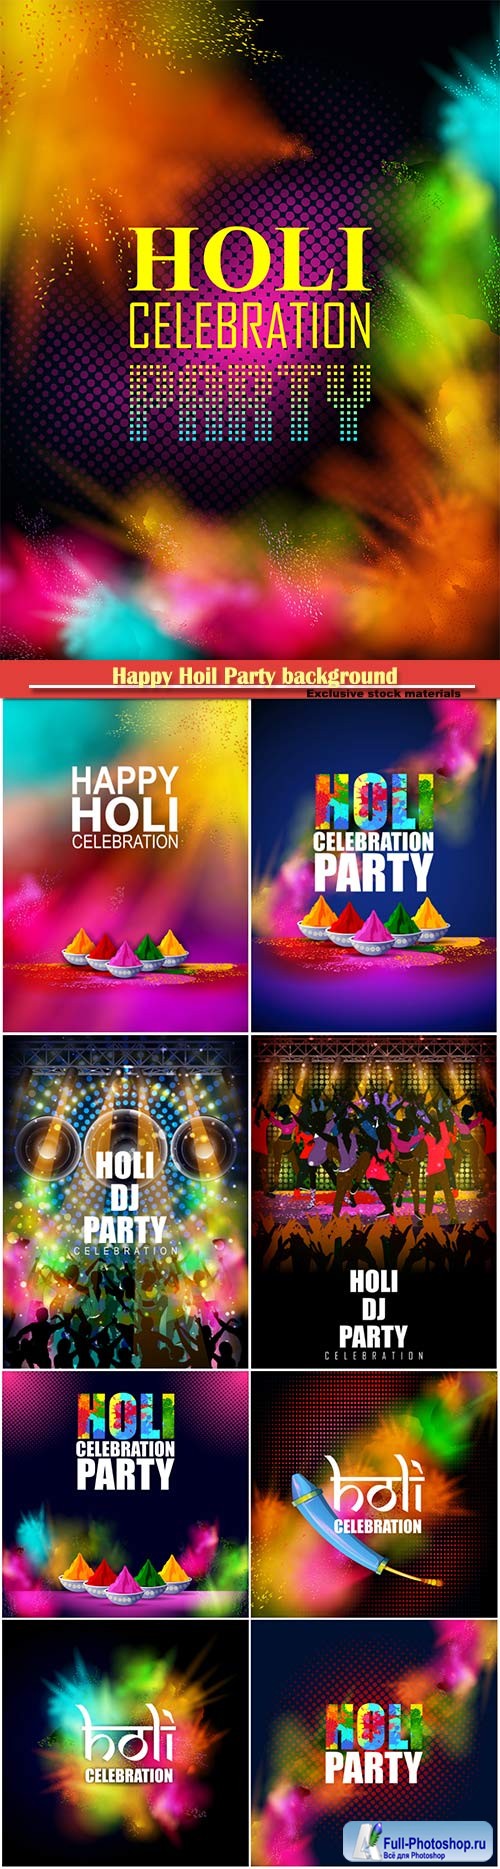 Happy Hoil Party background for festival of colors in India